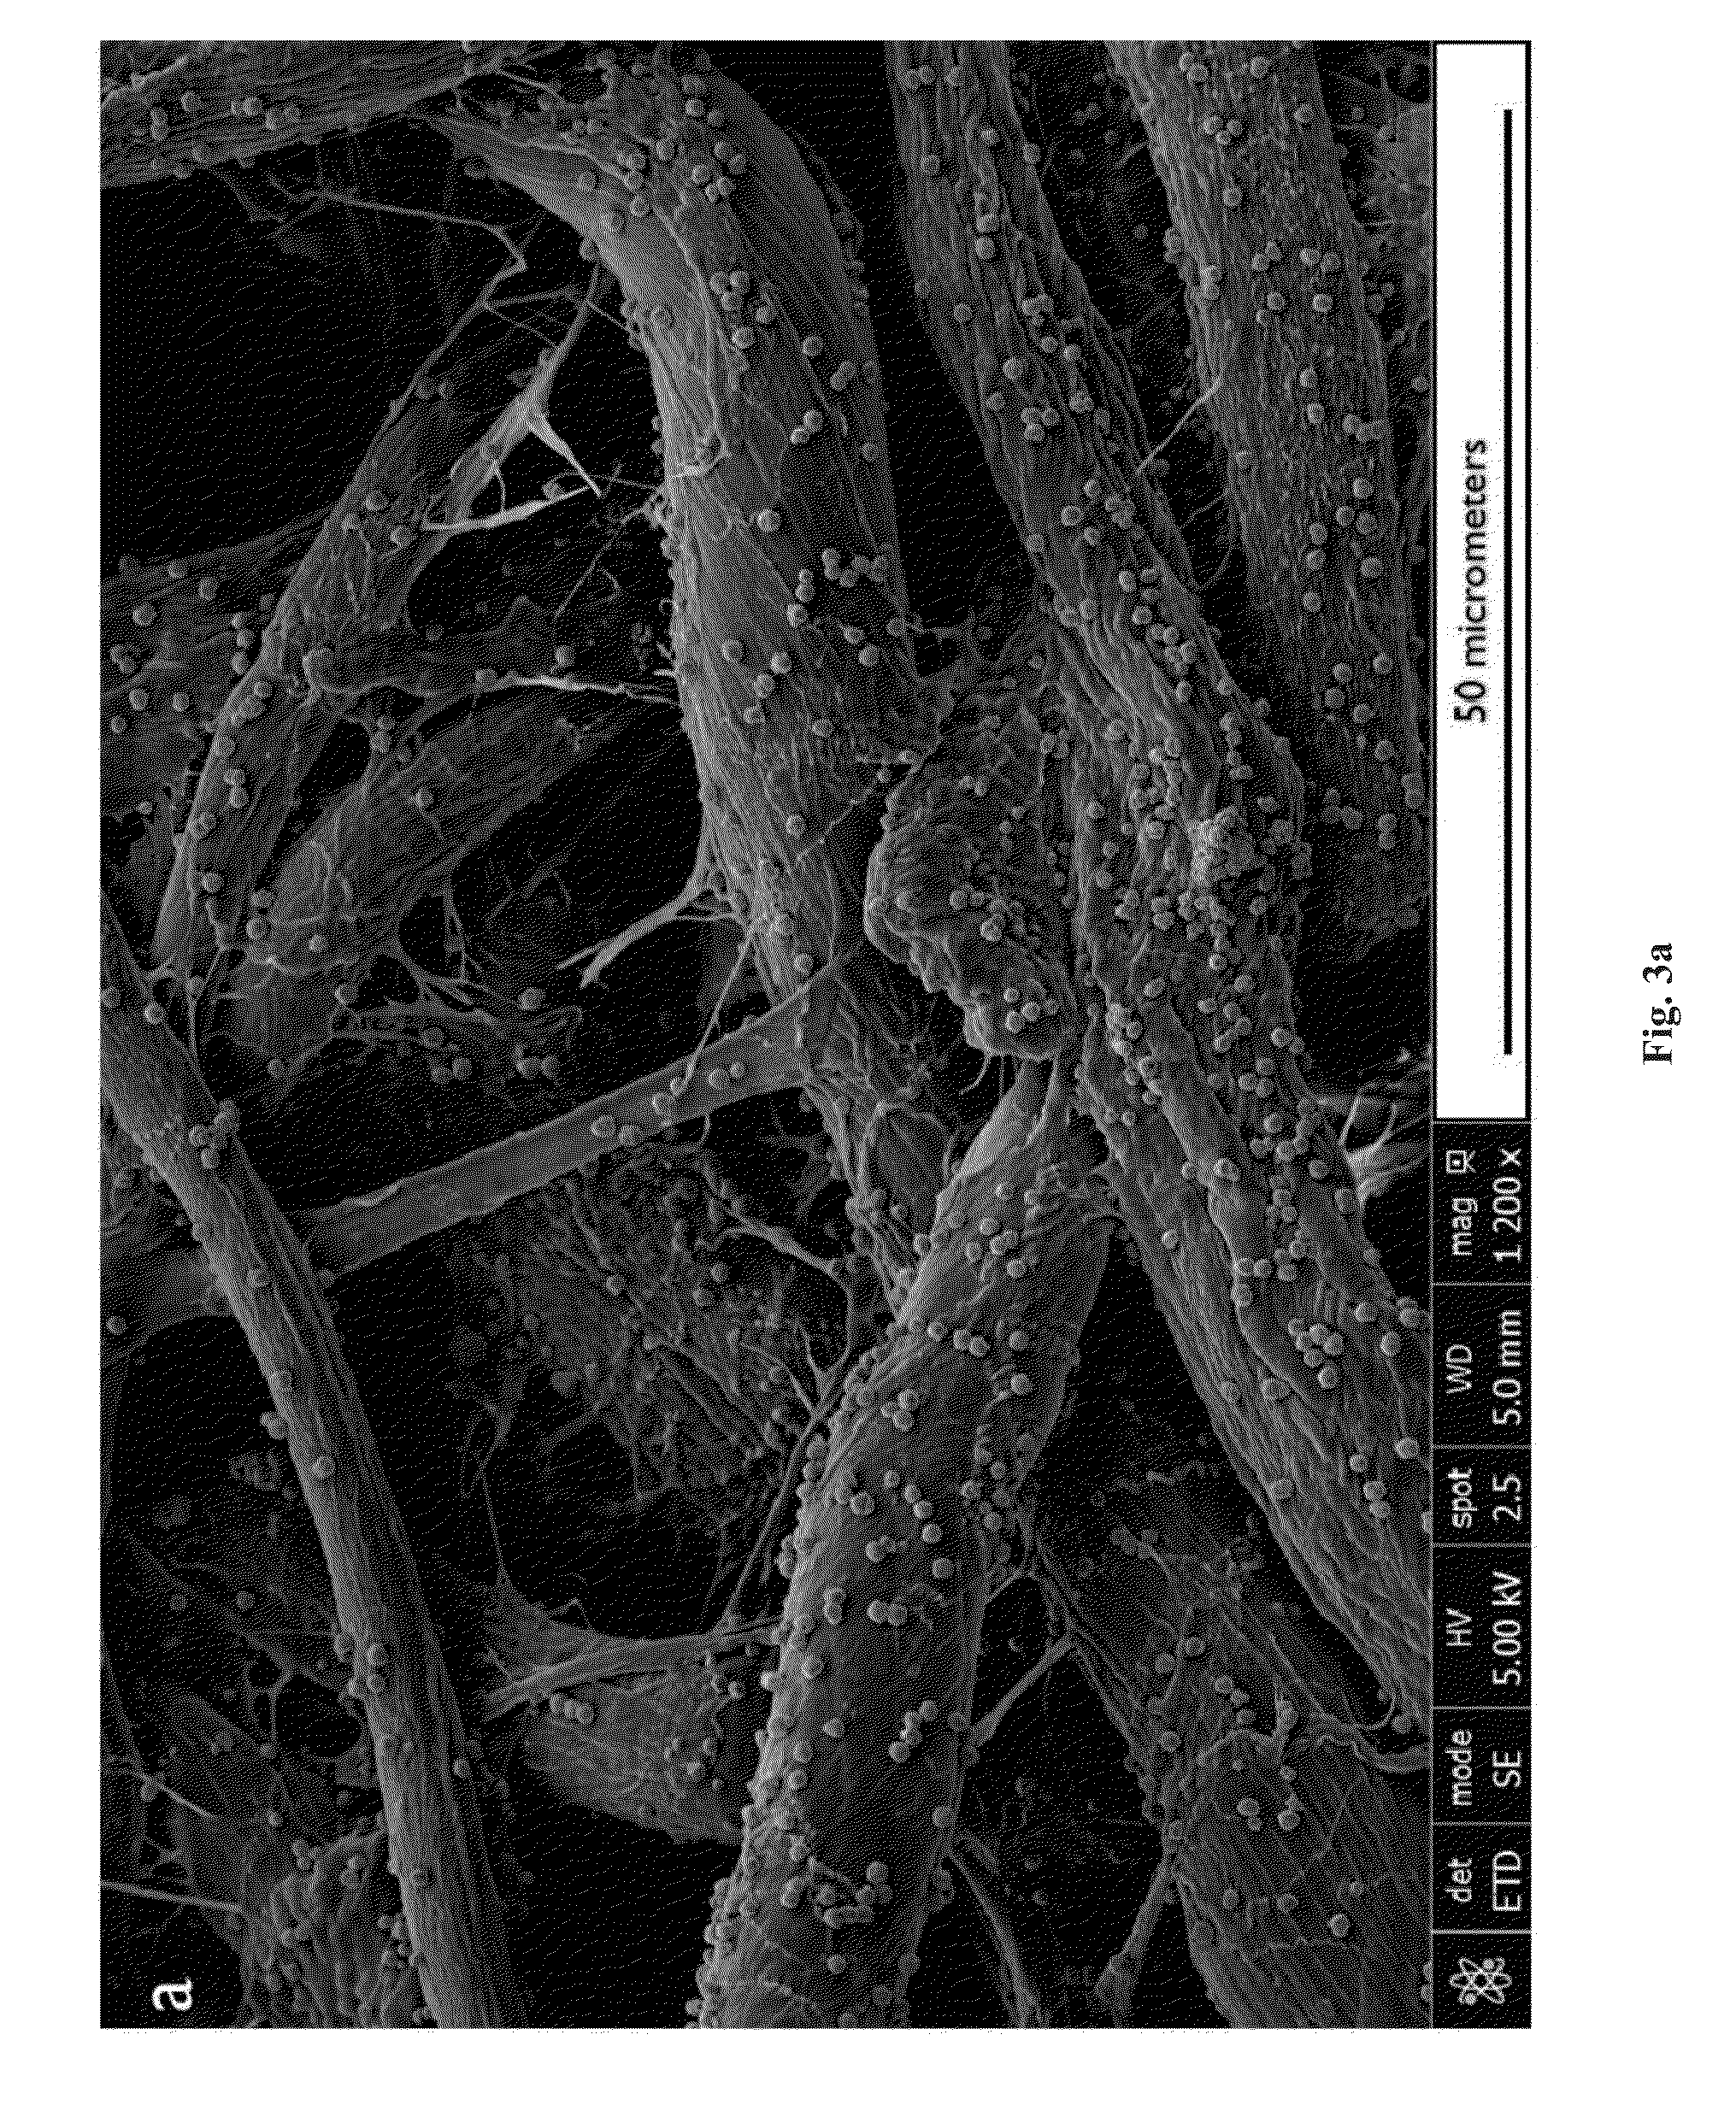 Compositions and methods for preparing copper-containing paper and uses thereof